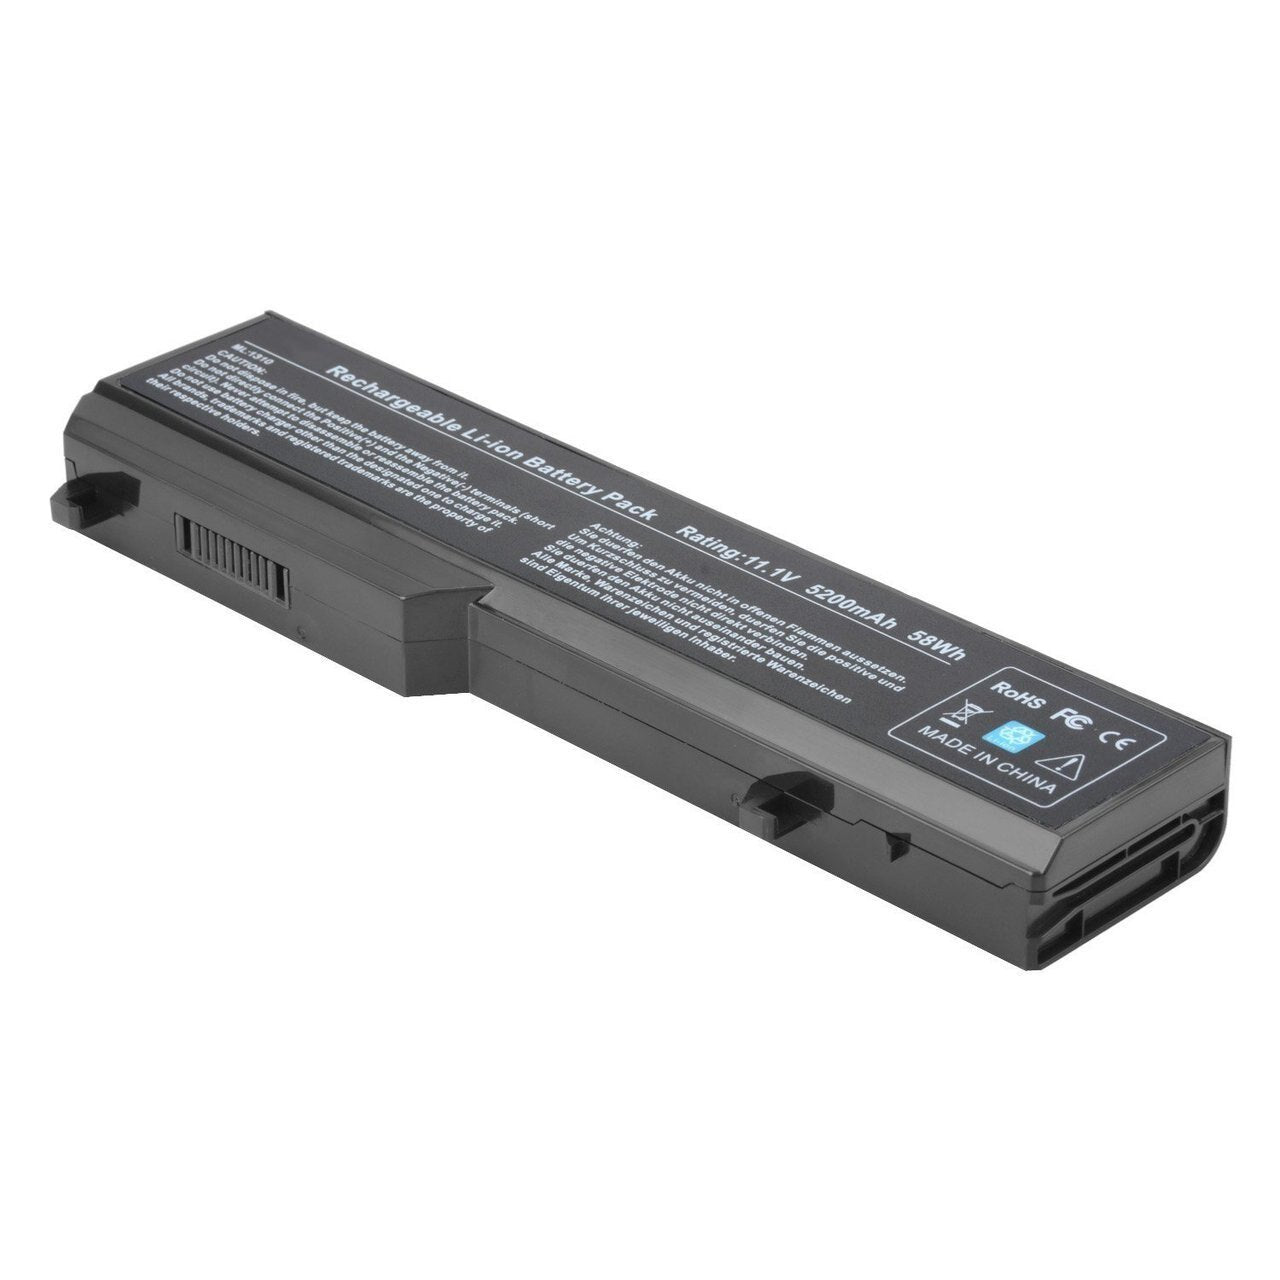 Dell Vostro 1320, 2510, G276C Replacement Laptop Battery - eBuy UAE